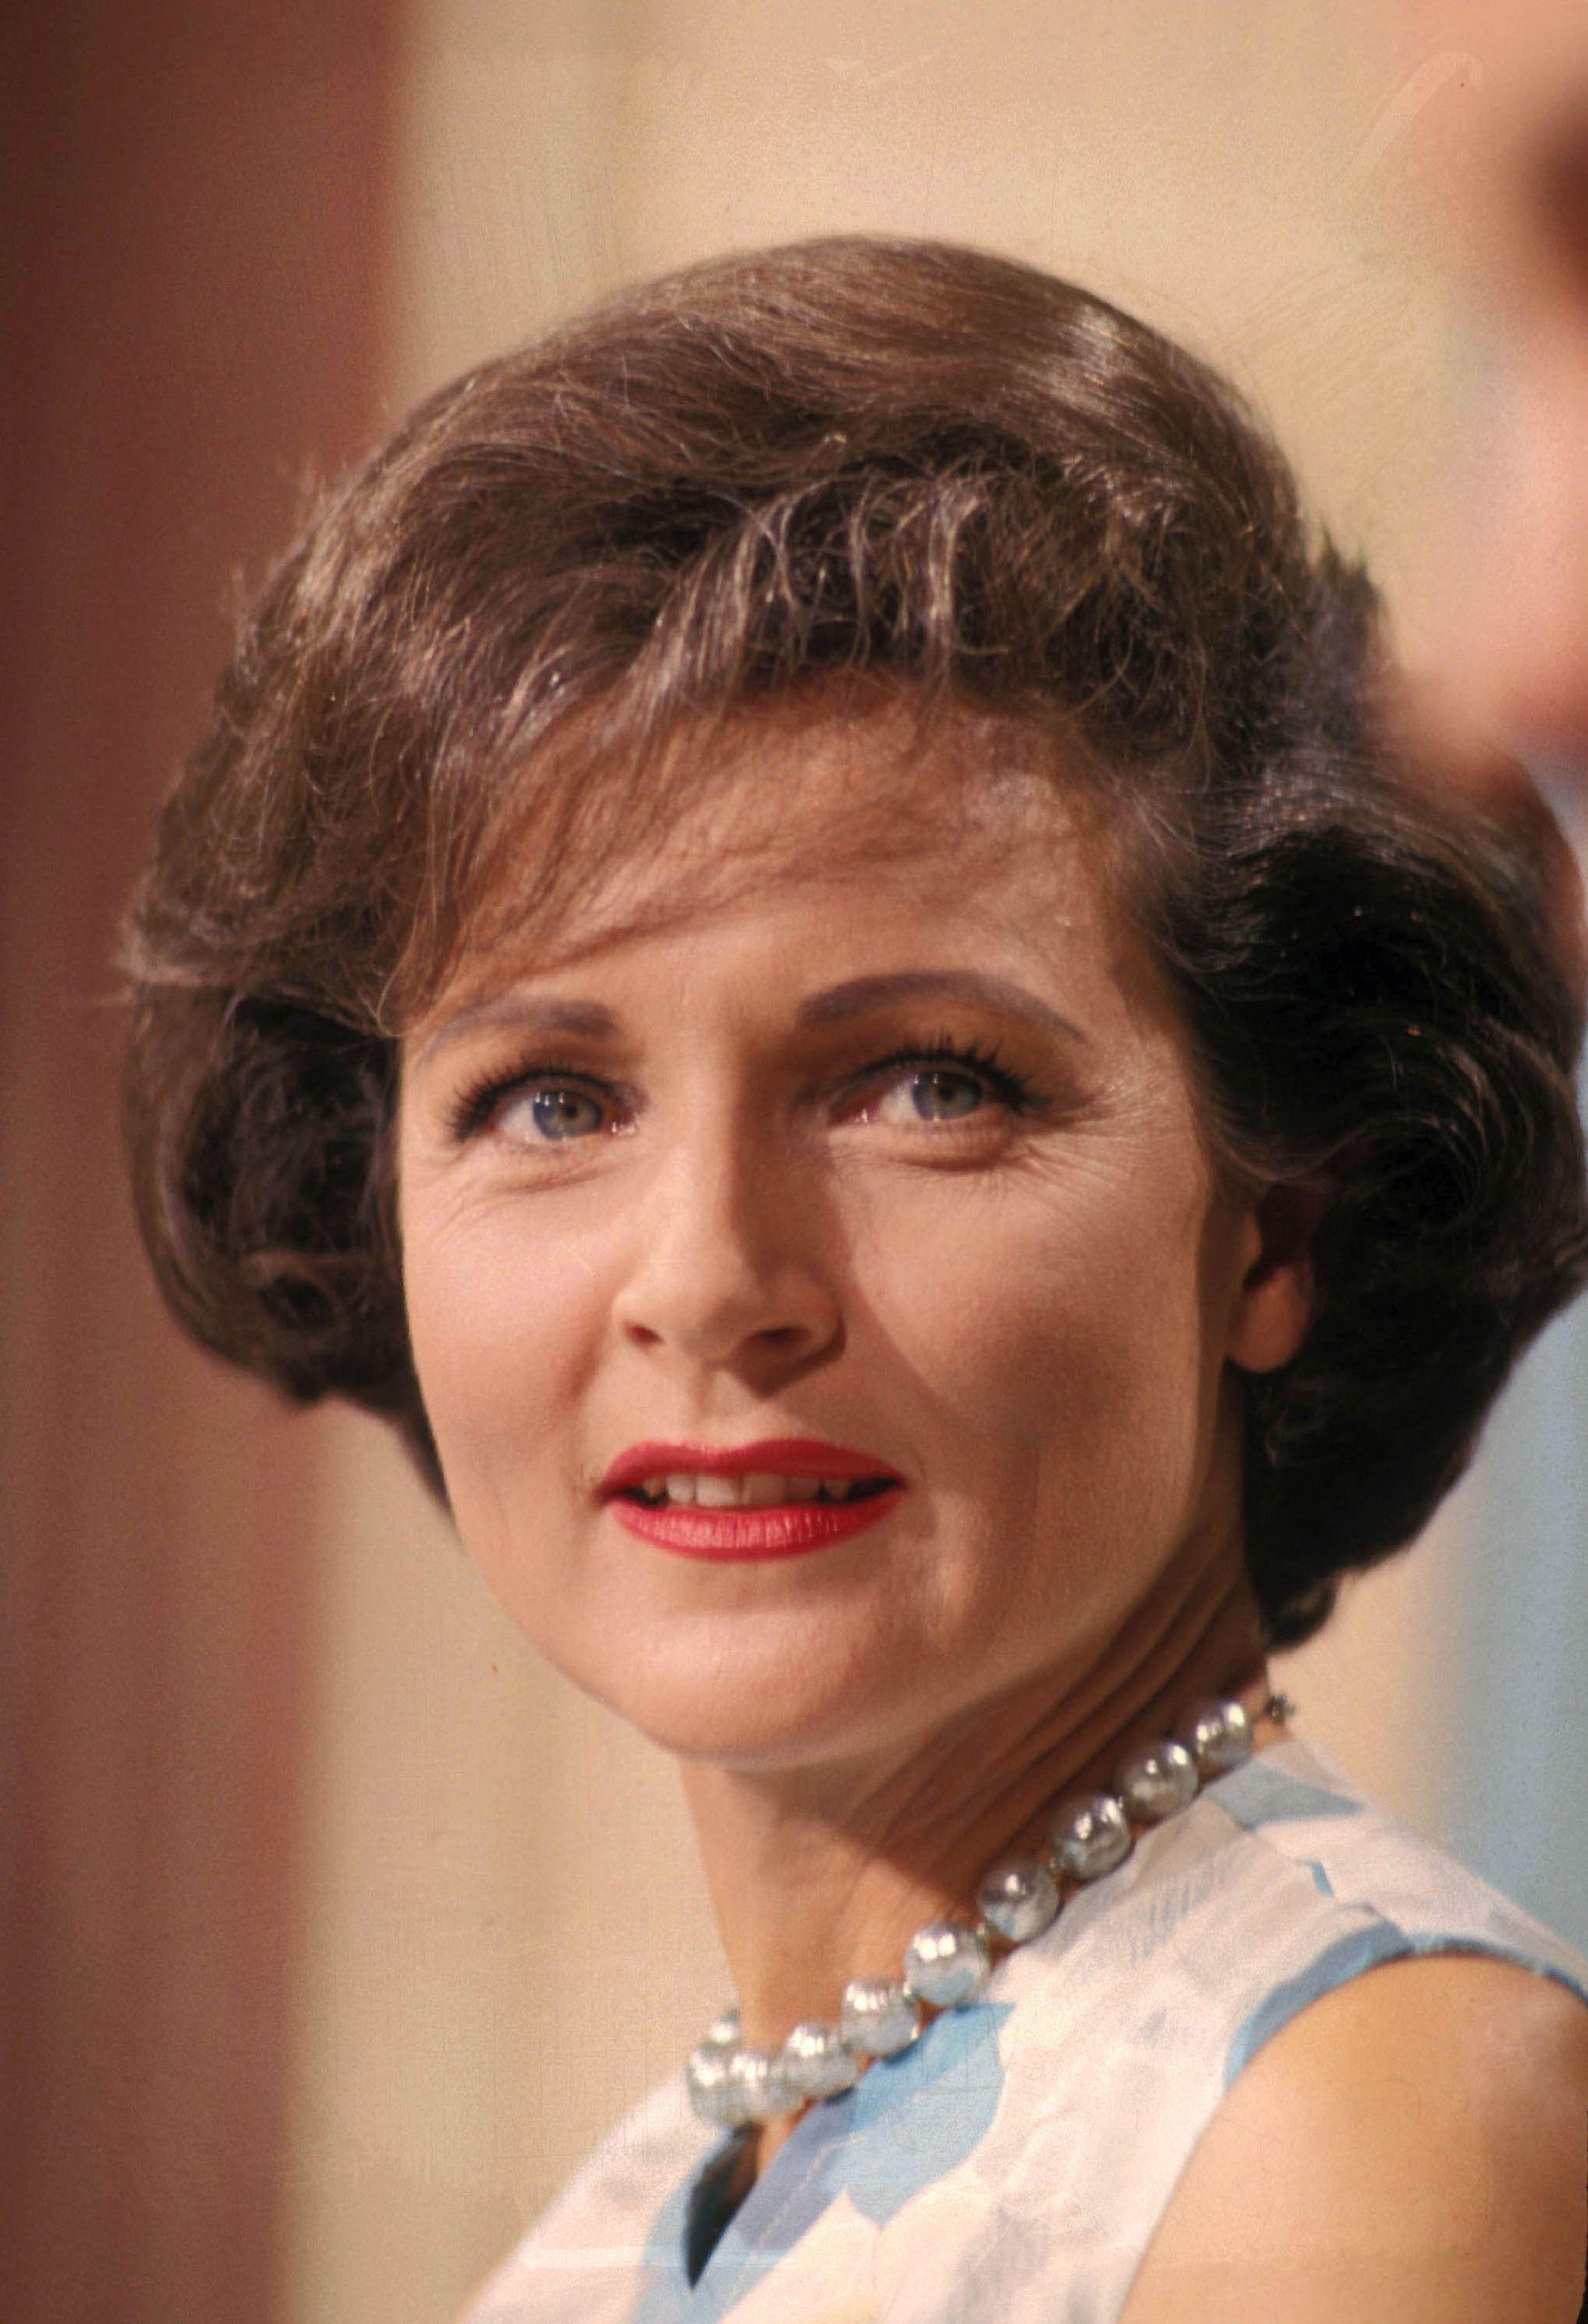 The Amazing Betty White Is 91 Today. Betty white, People